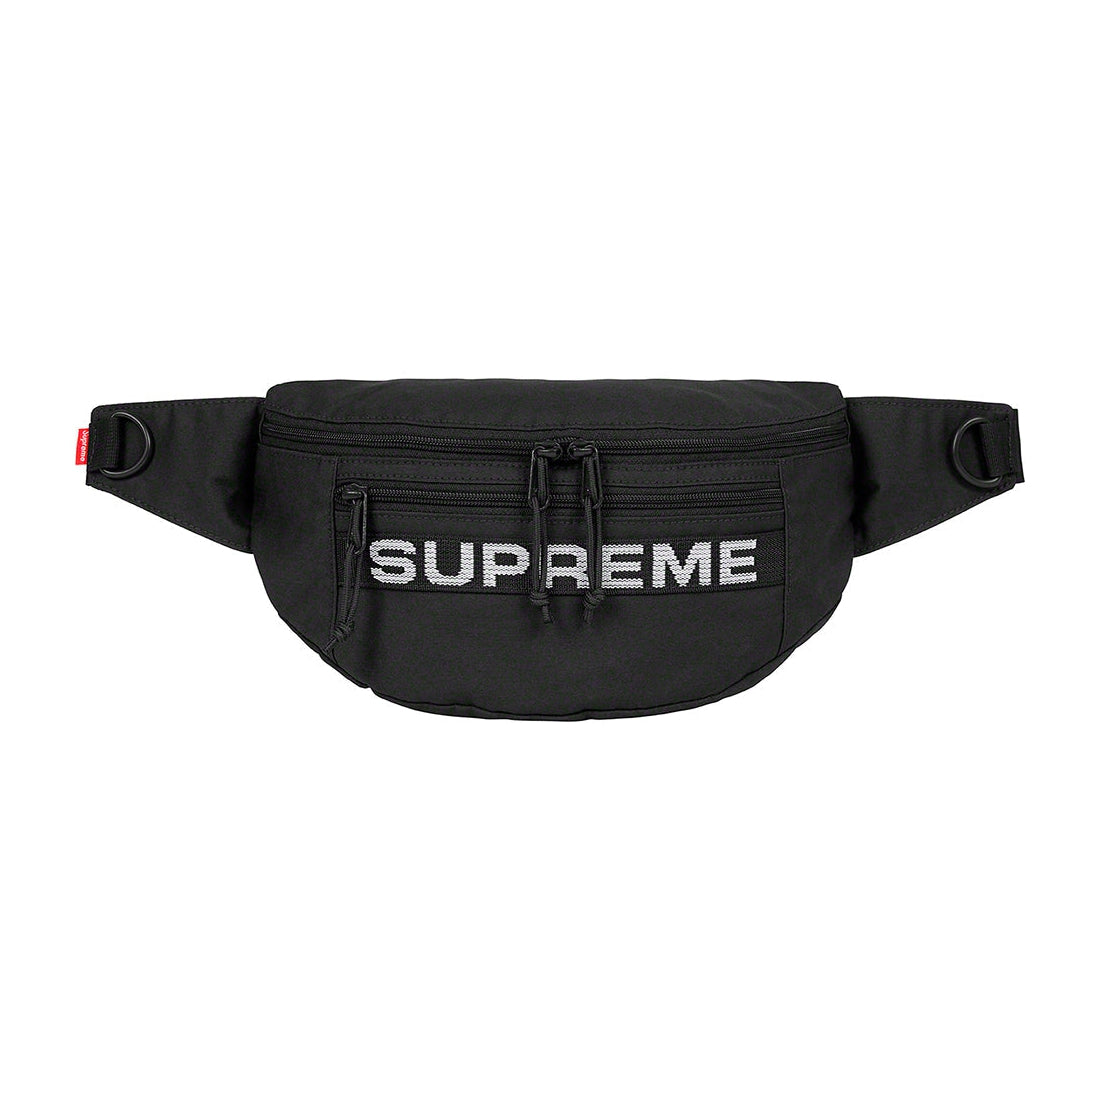 Supreme Field Waist Bag Black by Supreme from £85.00